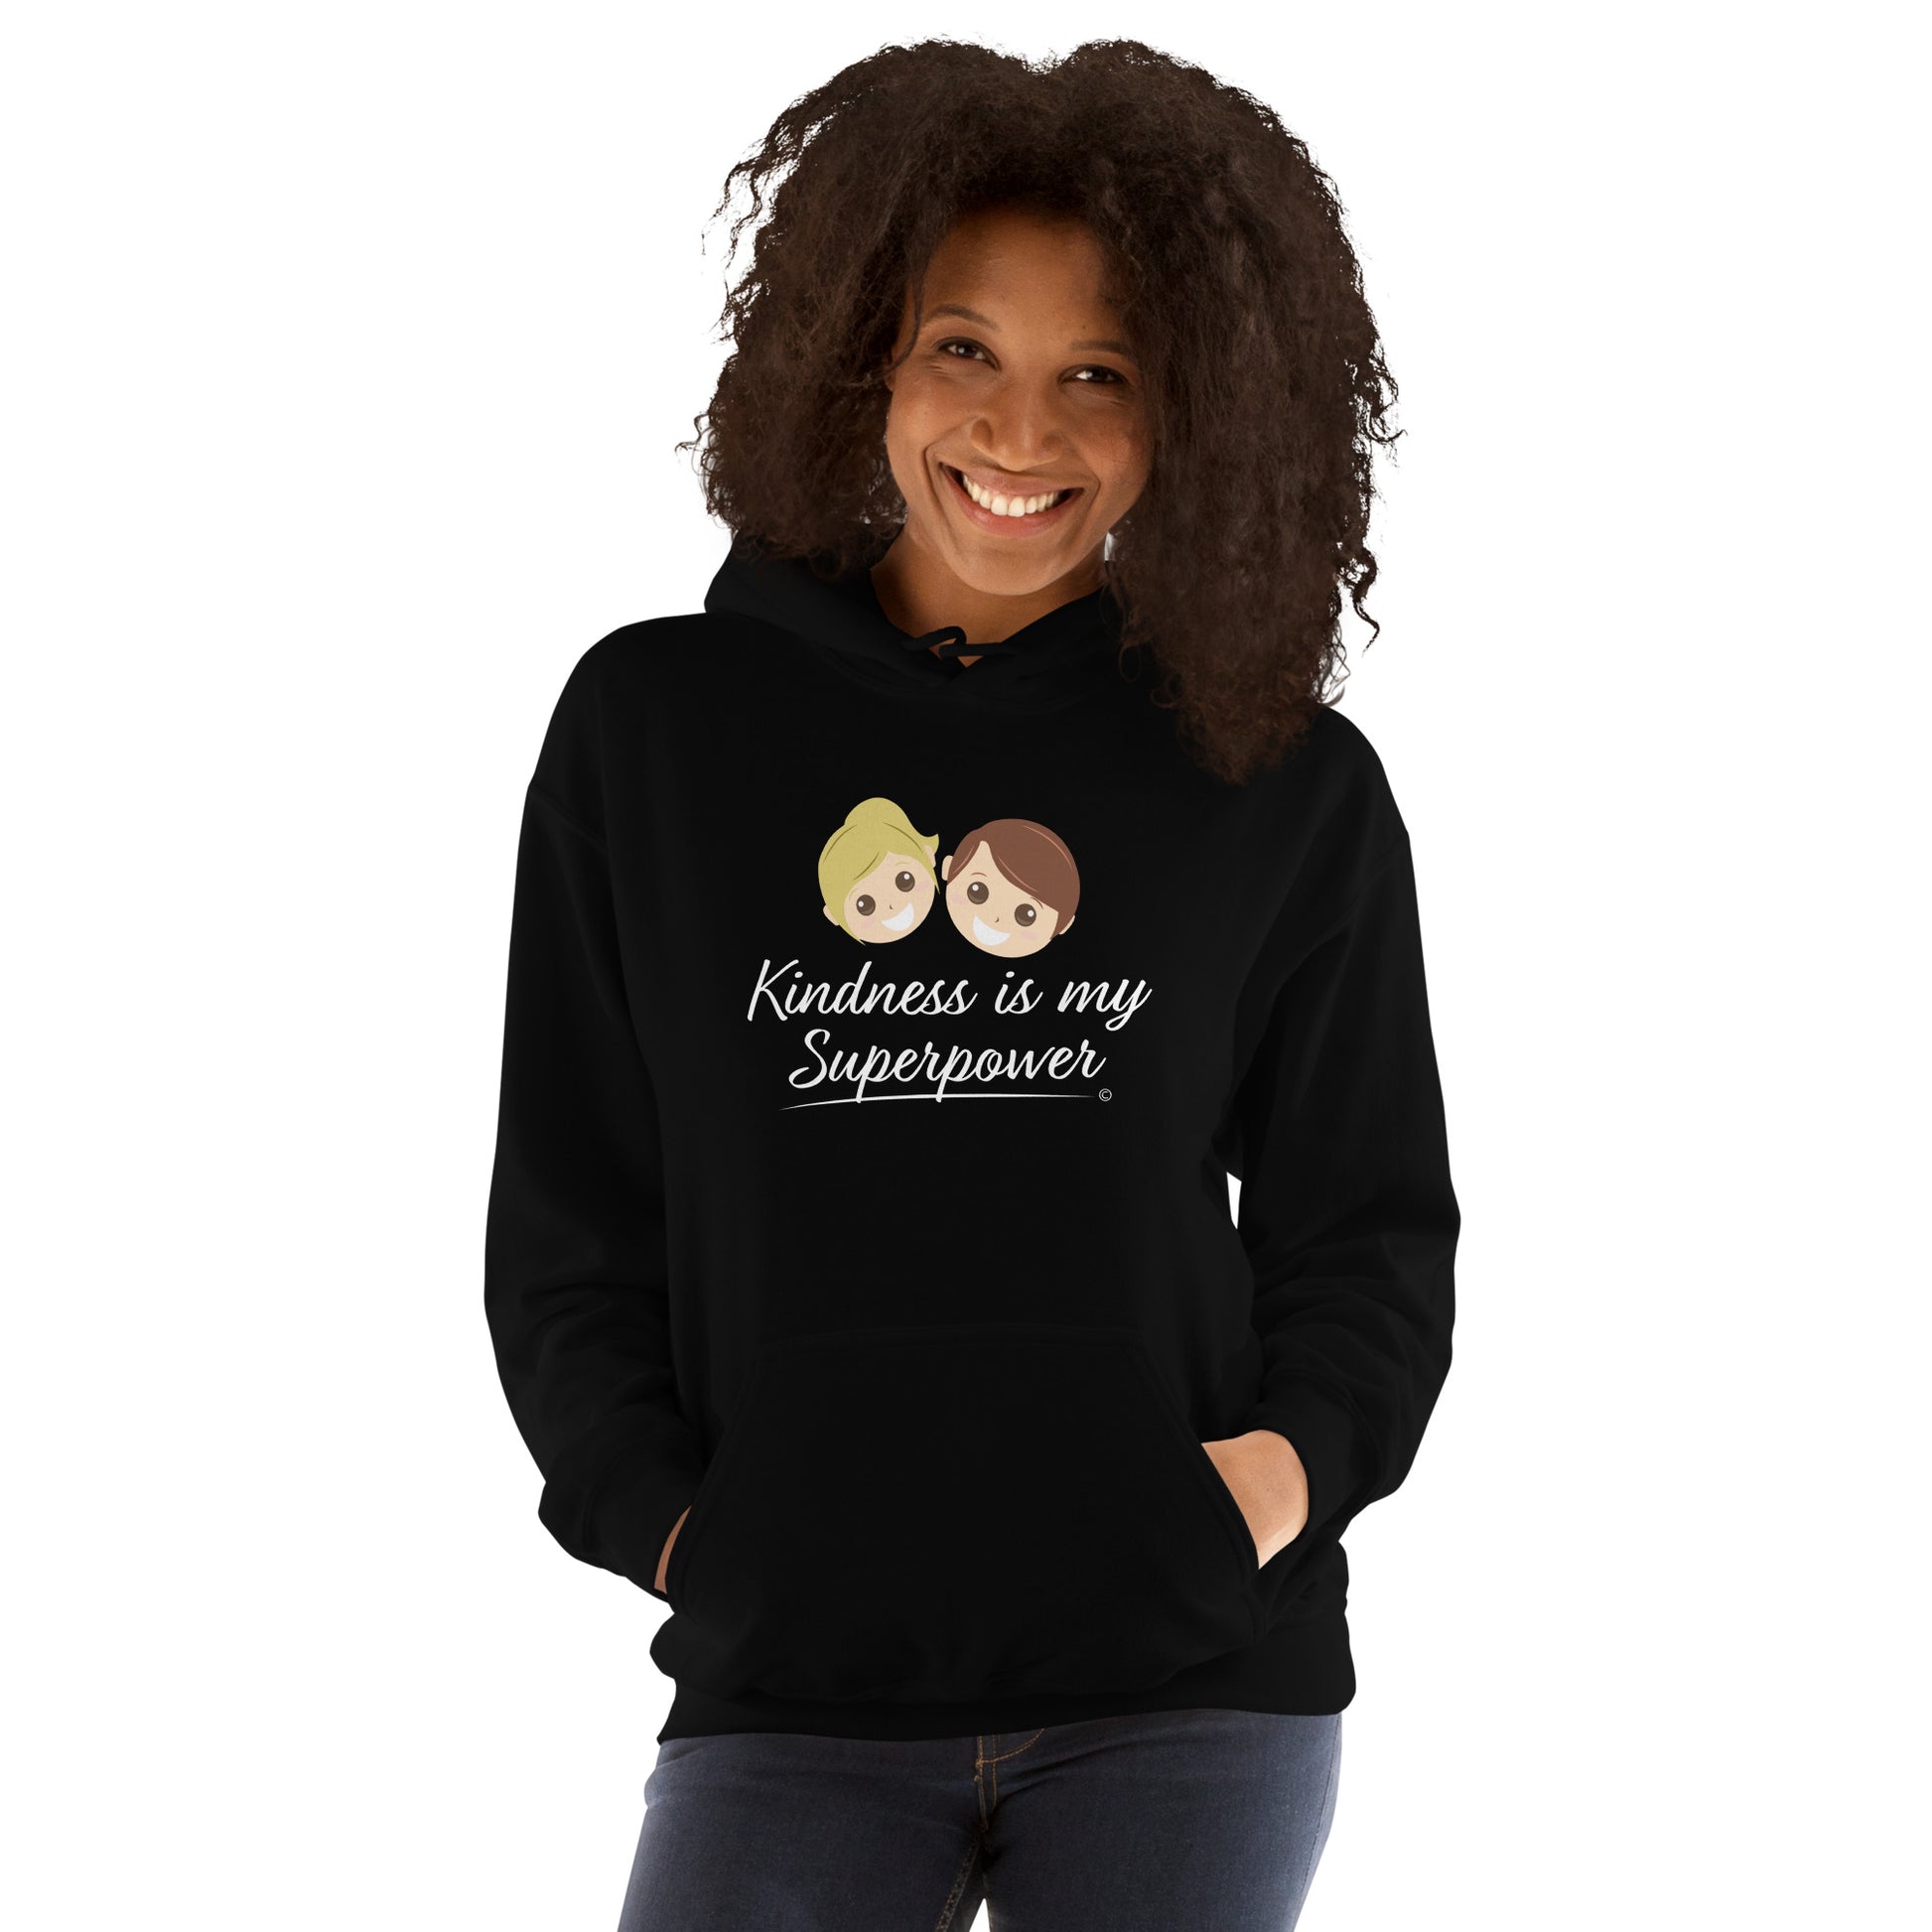 A smiling  woman showcasing a comfortable unisex hoodie in black, featuring the uplifting quote 'Kindness is my Superpower' in bold lettering.